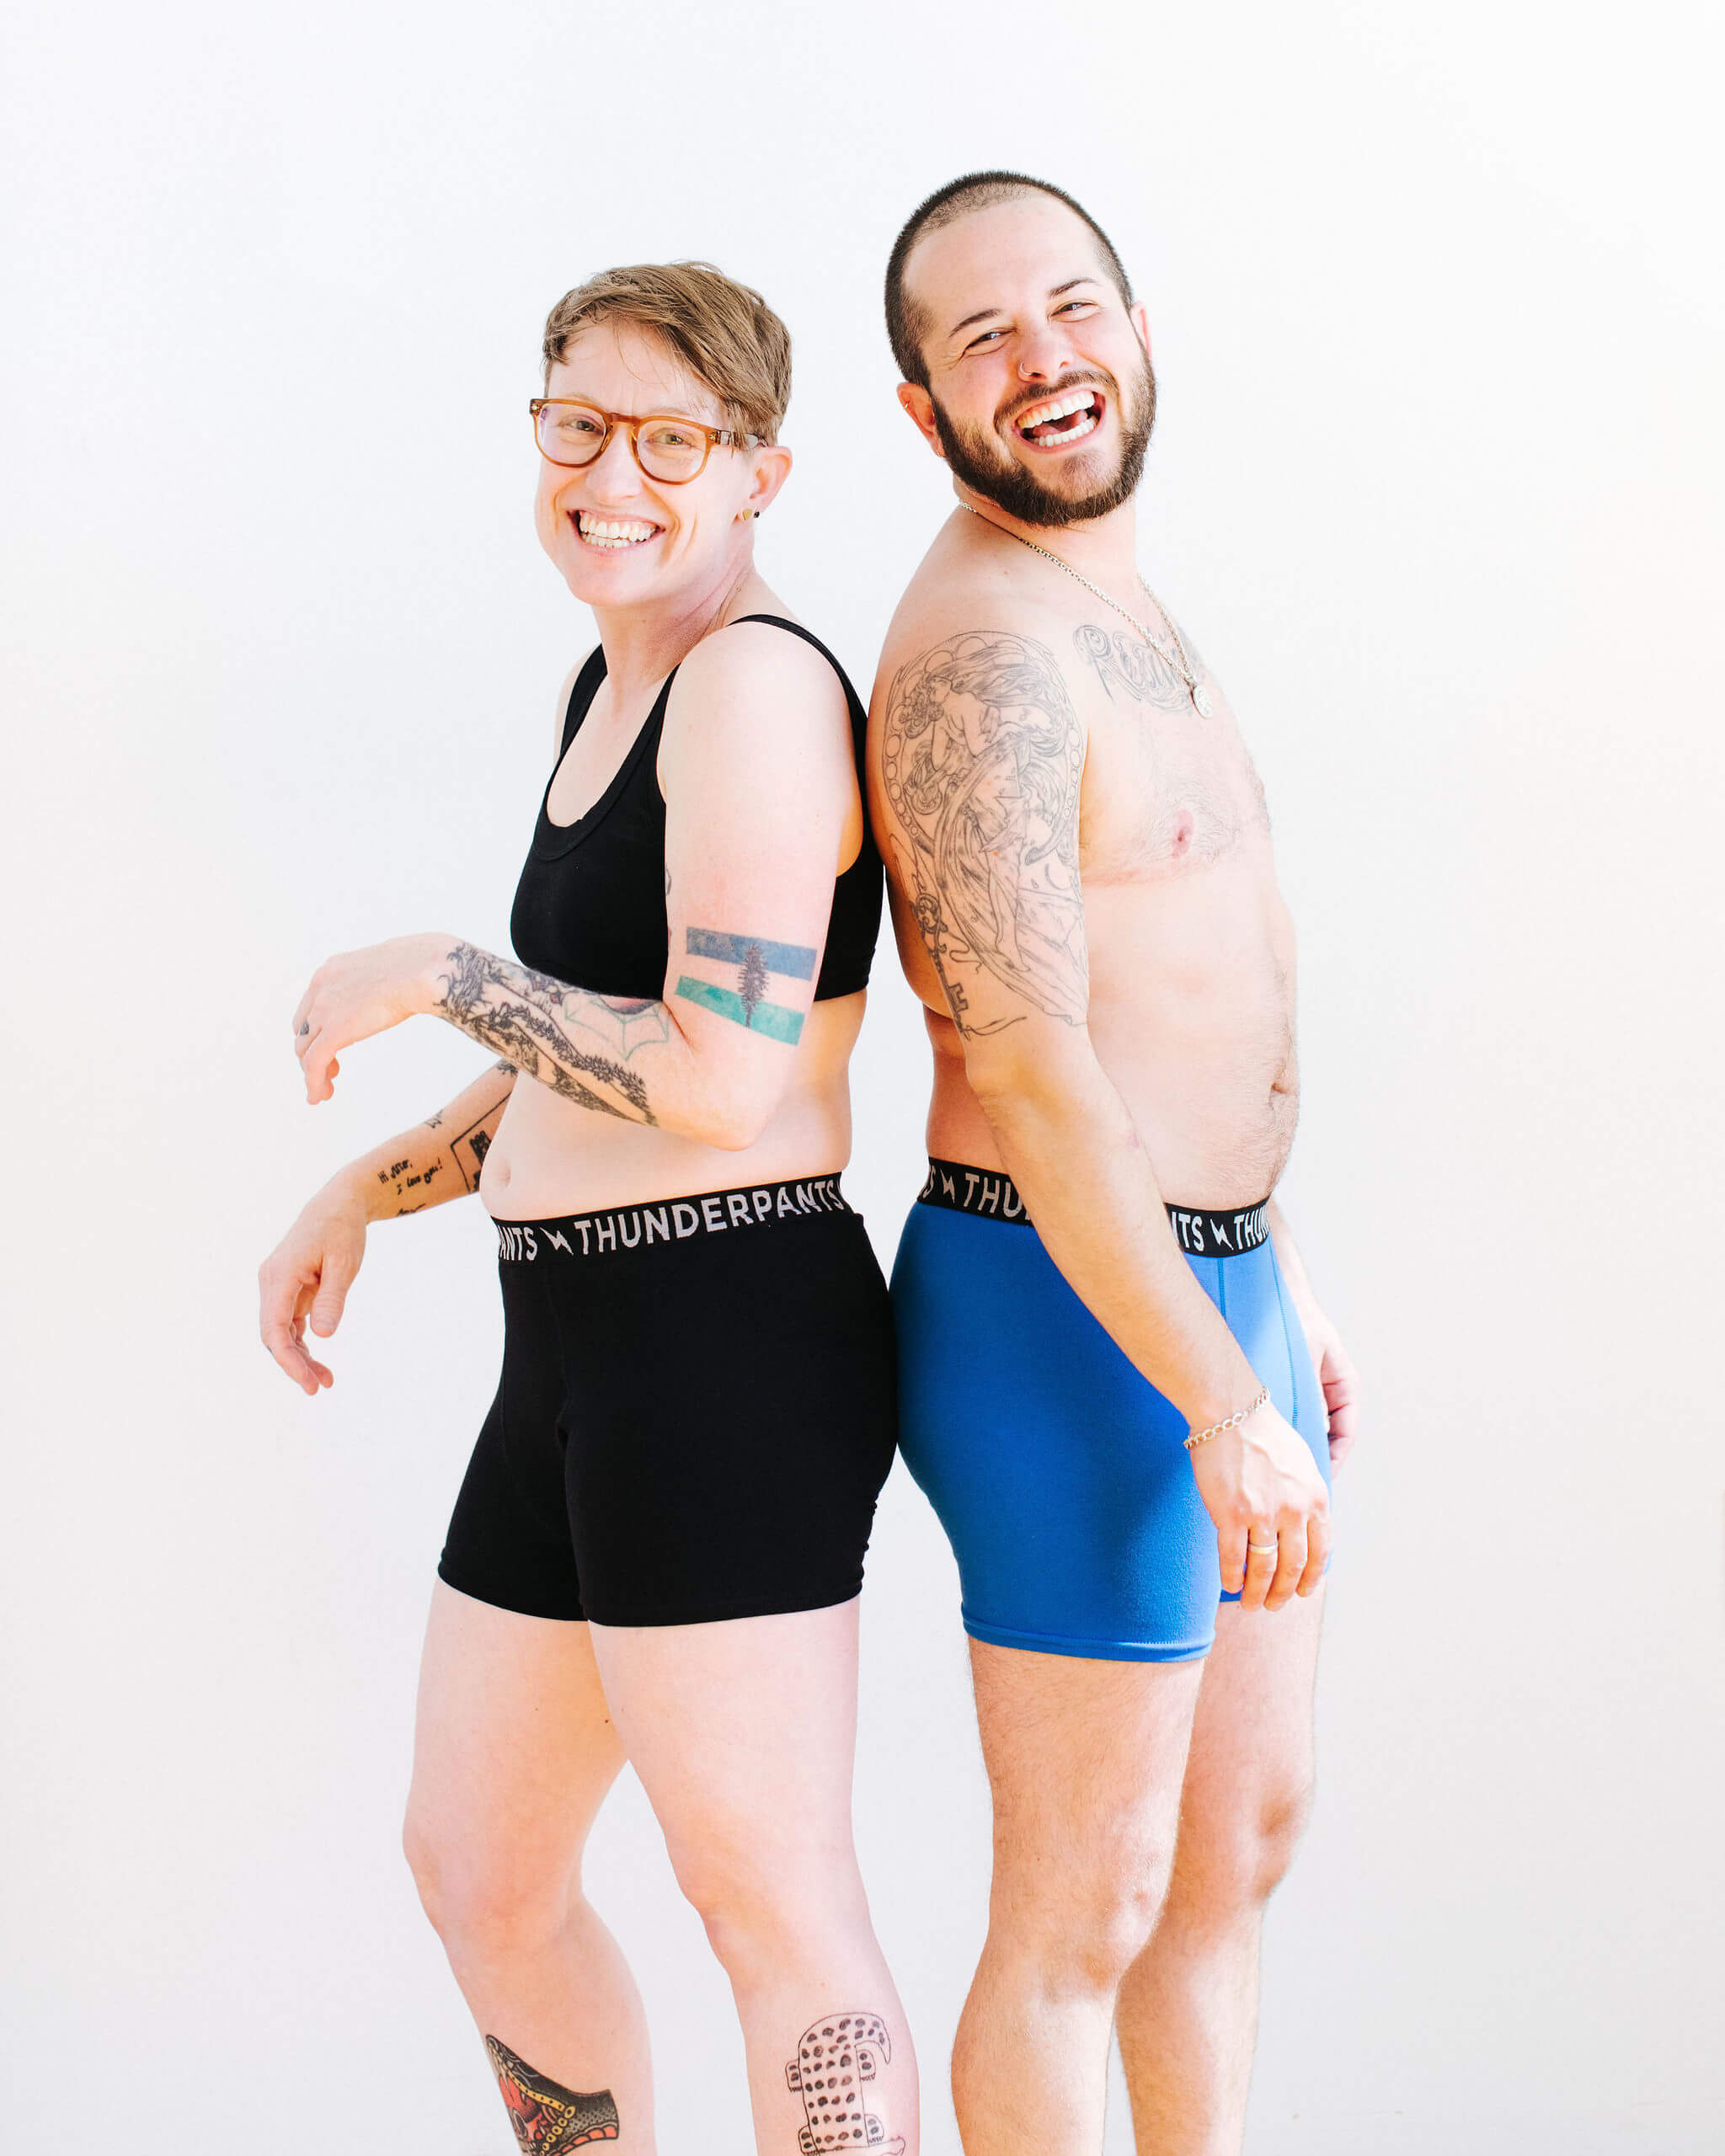 Two models wearing Thunderpants Boxer Brief style underwear in Plain Black and Blueberry Blue.